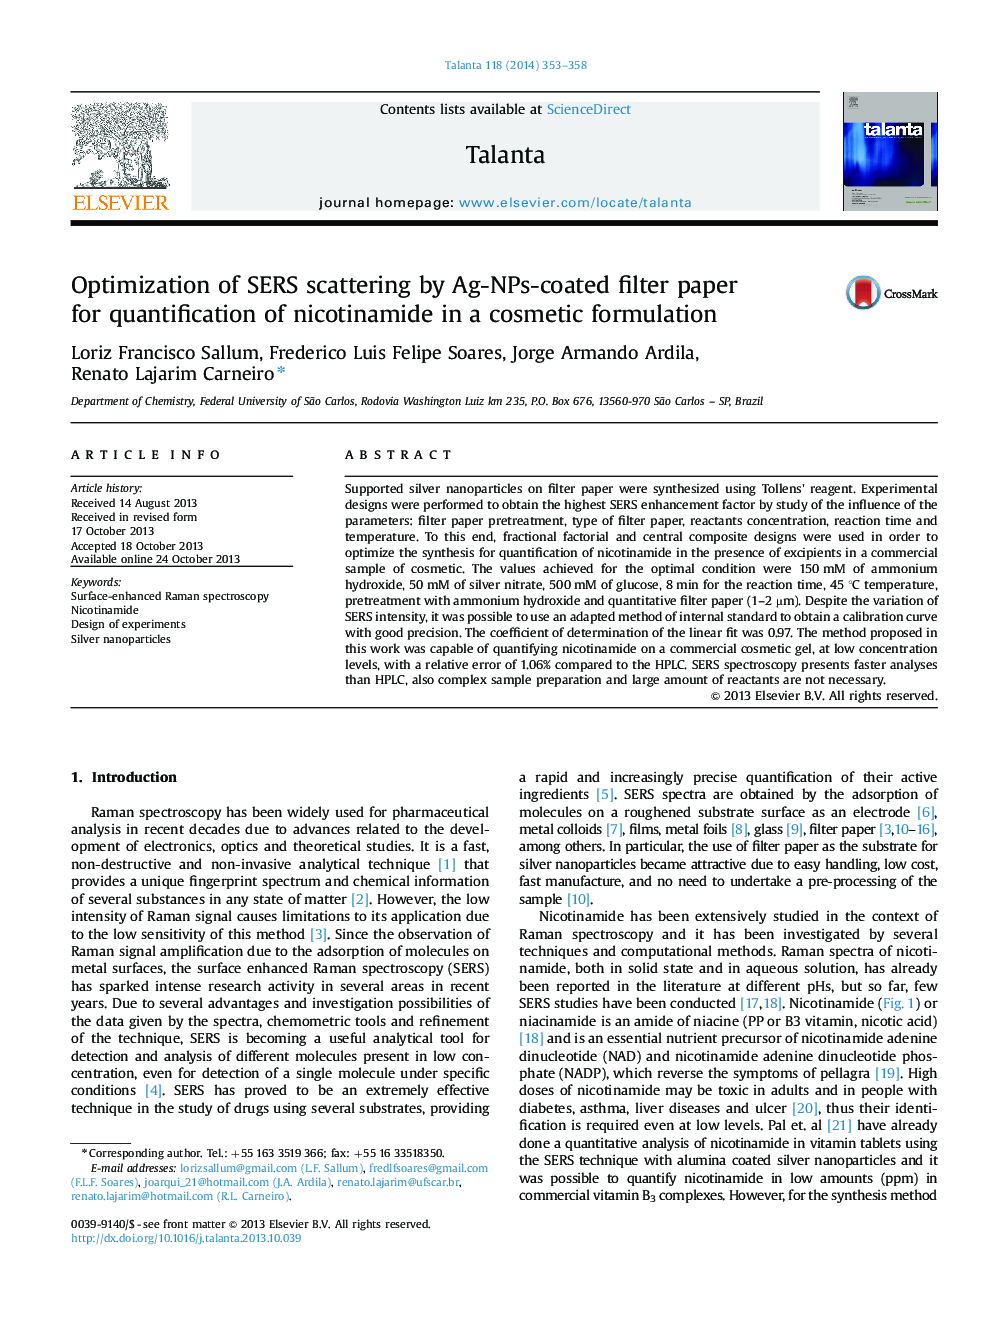 Optimization of SERS scattering by Ag-NPs-coated filter paper for quantification of nicotinamide in a cosmetic formulation